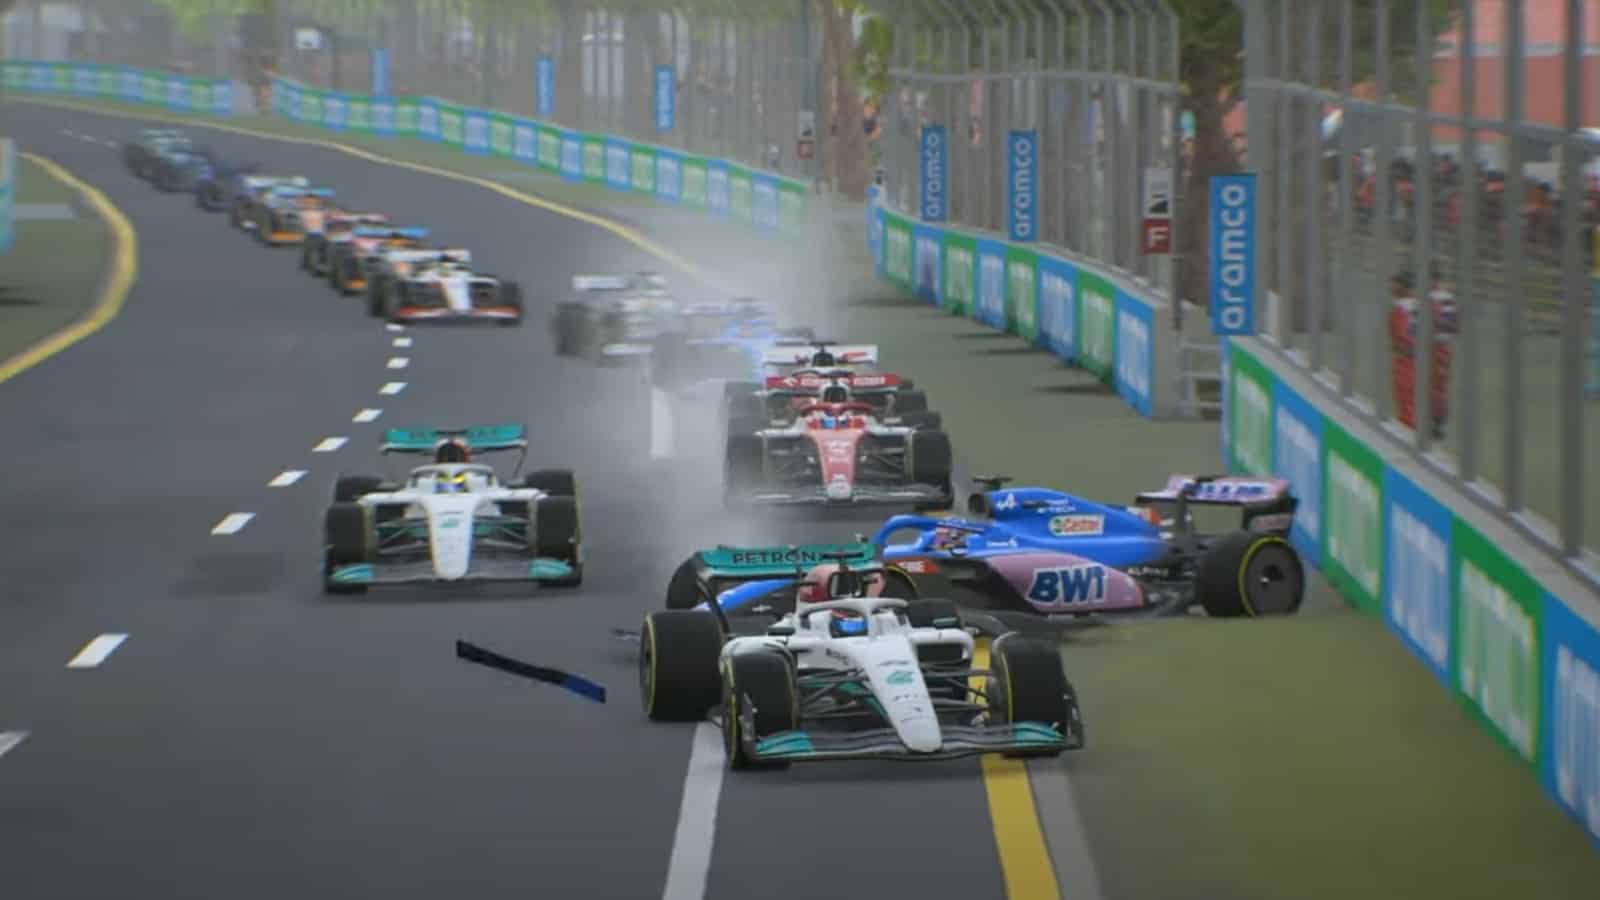 An accident in F1 Manager 2022